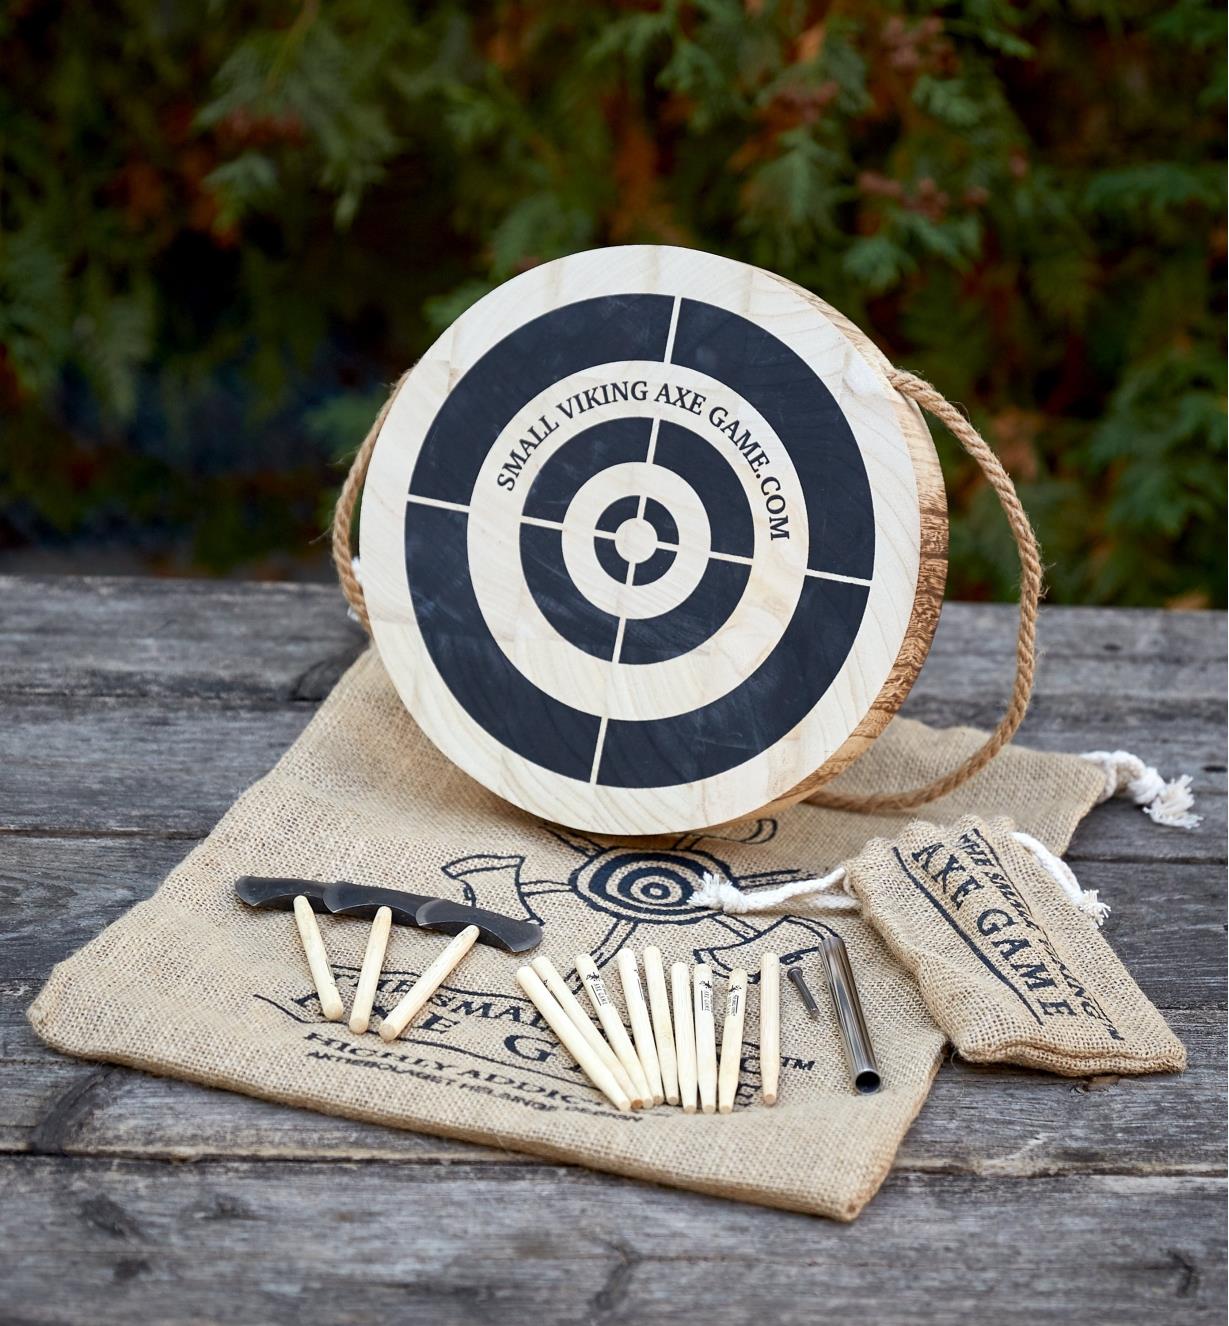 The contents of the mini axe-throwing game arranged on a backyard deck